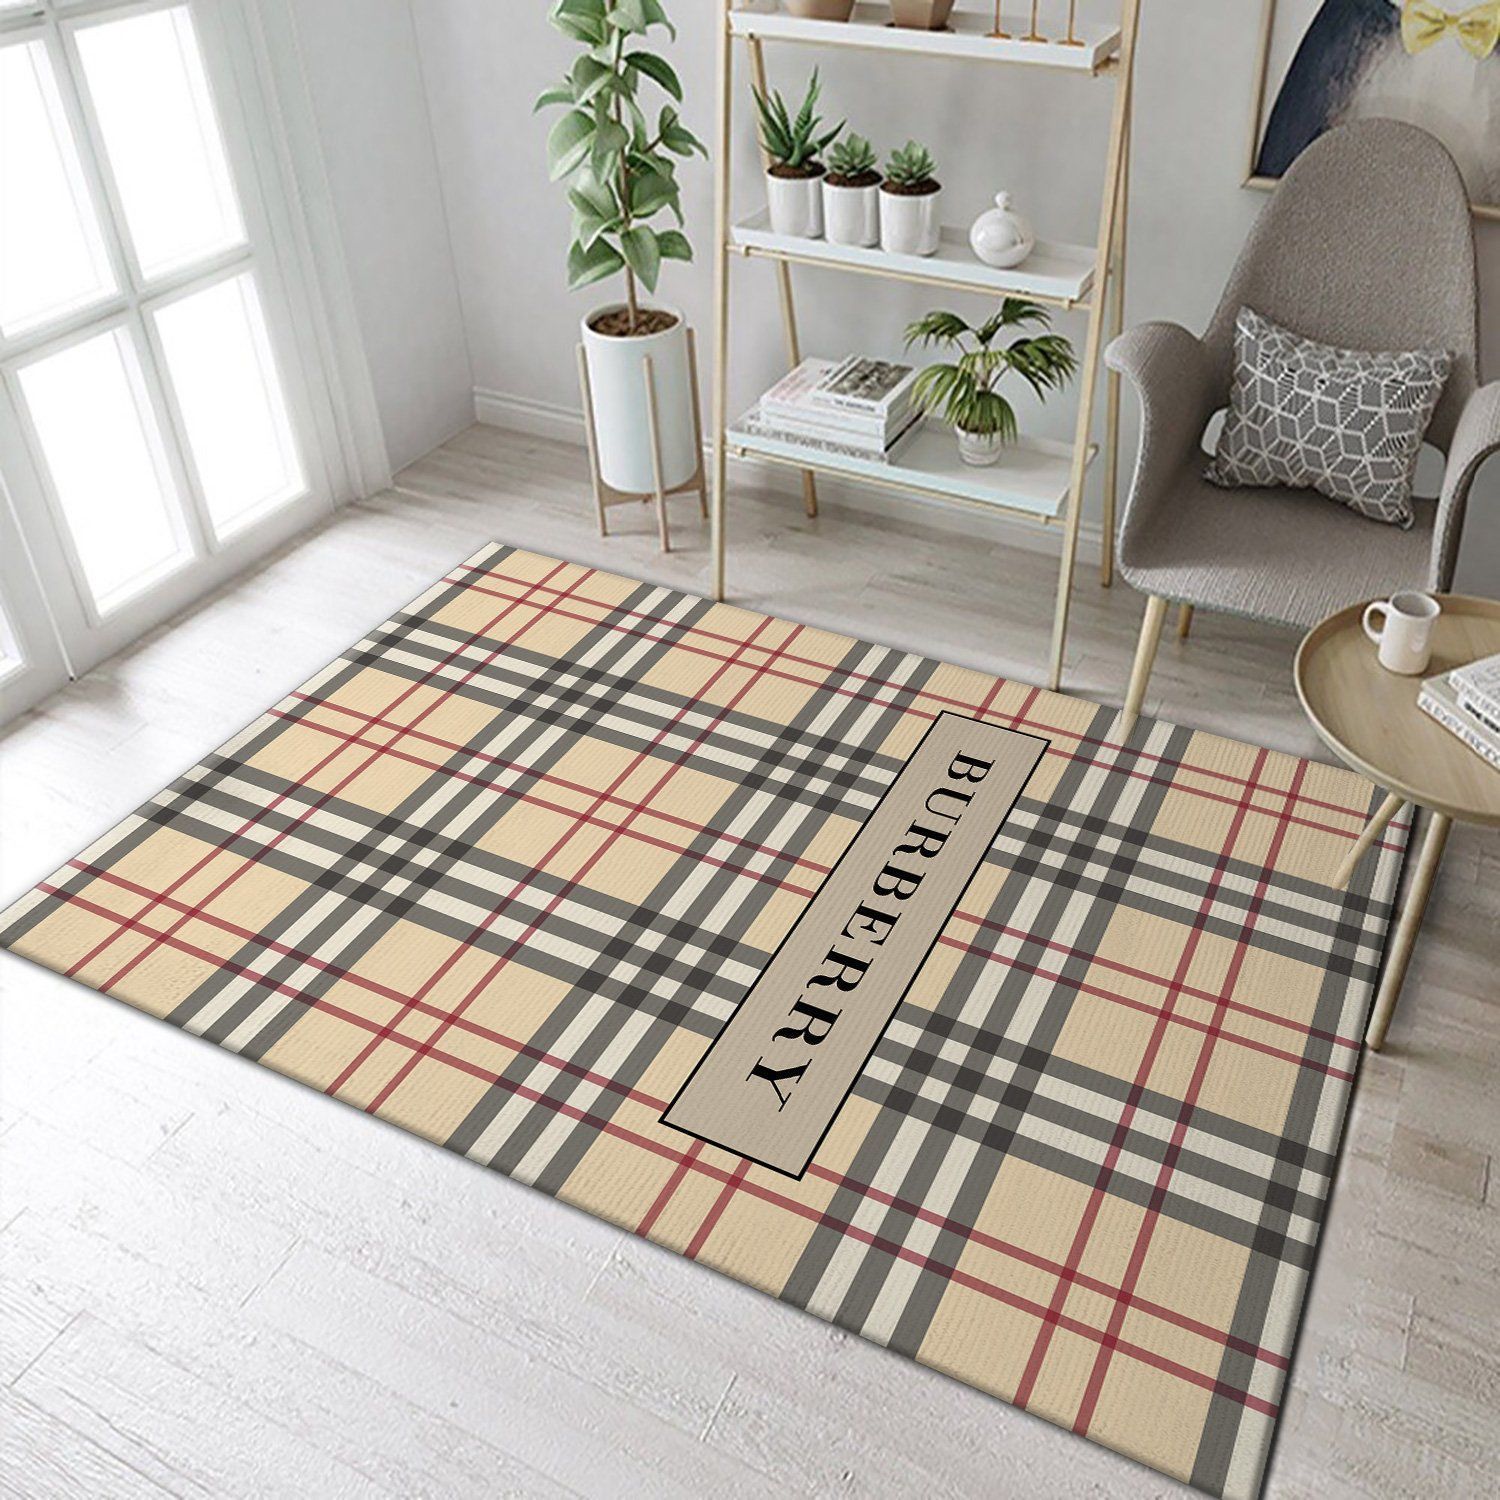 Burberry Logo Area Rugs Living Room Carpet FN241223 Brands Fashion Floor Decor The US Decor - Indoor Outdoor Rugs 1